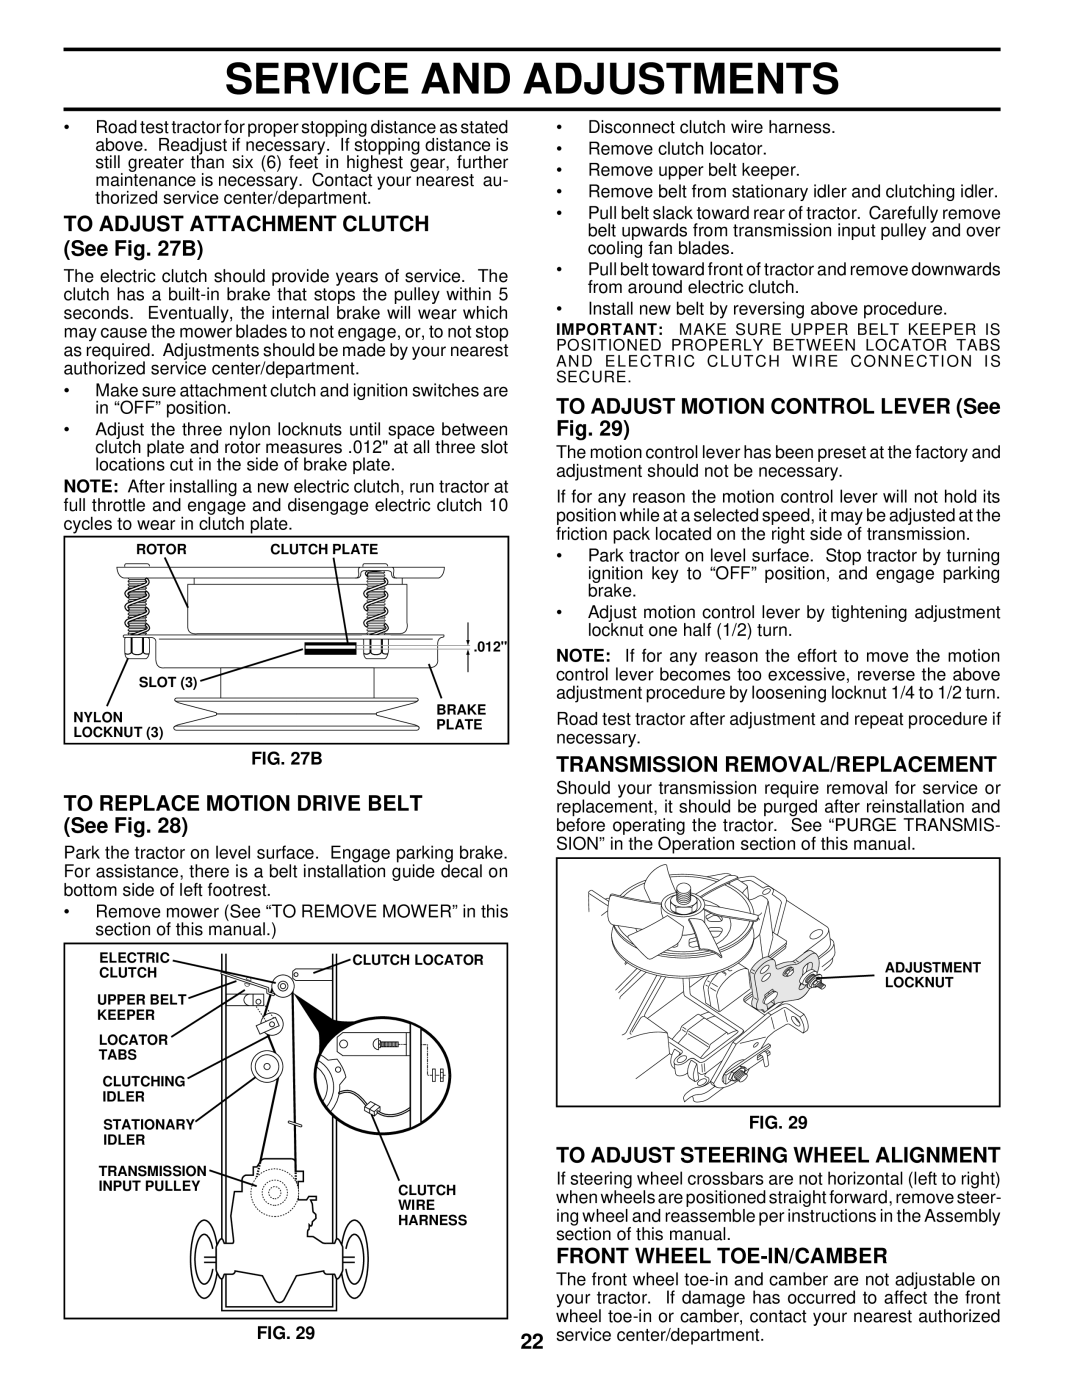 Husqvarna LTH130 Service And Adjustments, TO ADJUST ATTACHMENT CLUTCH See B, TO ADJUST MOTION CONTROL LEVER See Fig 